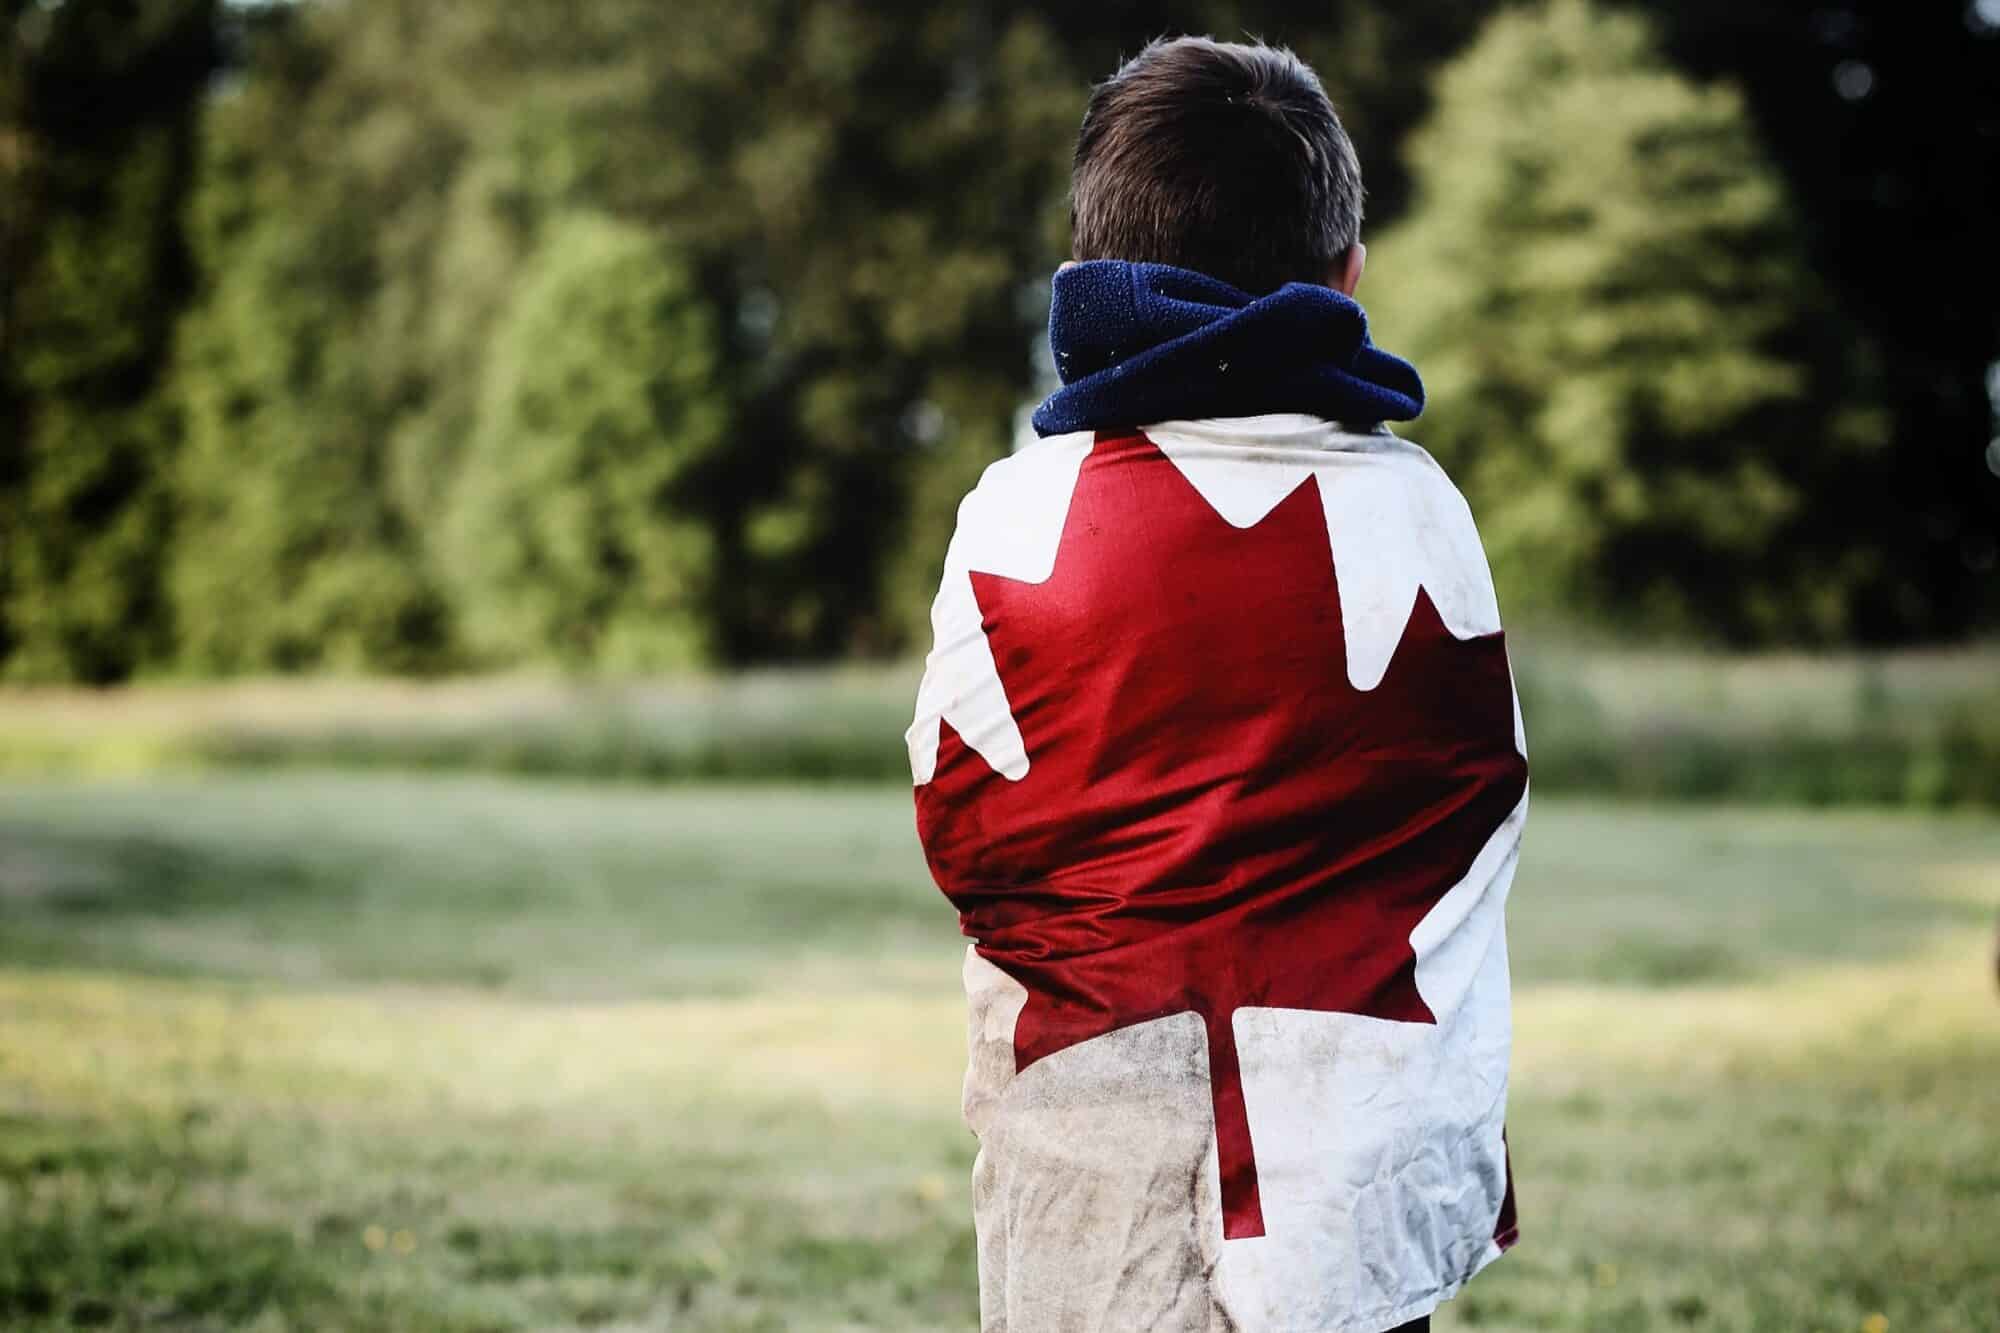 A Canadian child stands in a field draped in the Canadian flag.